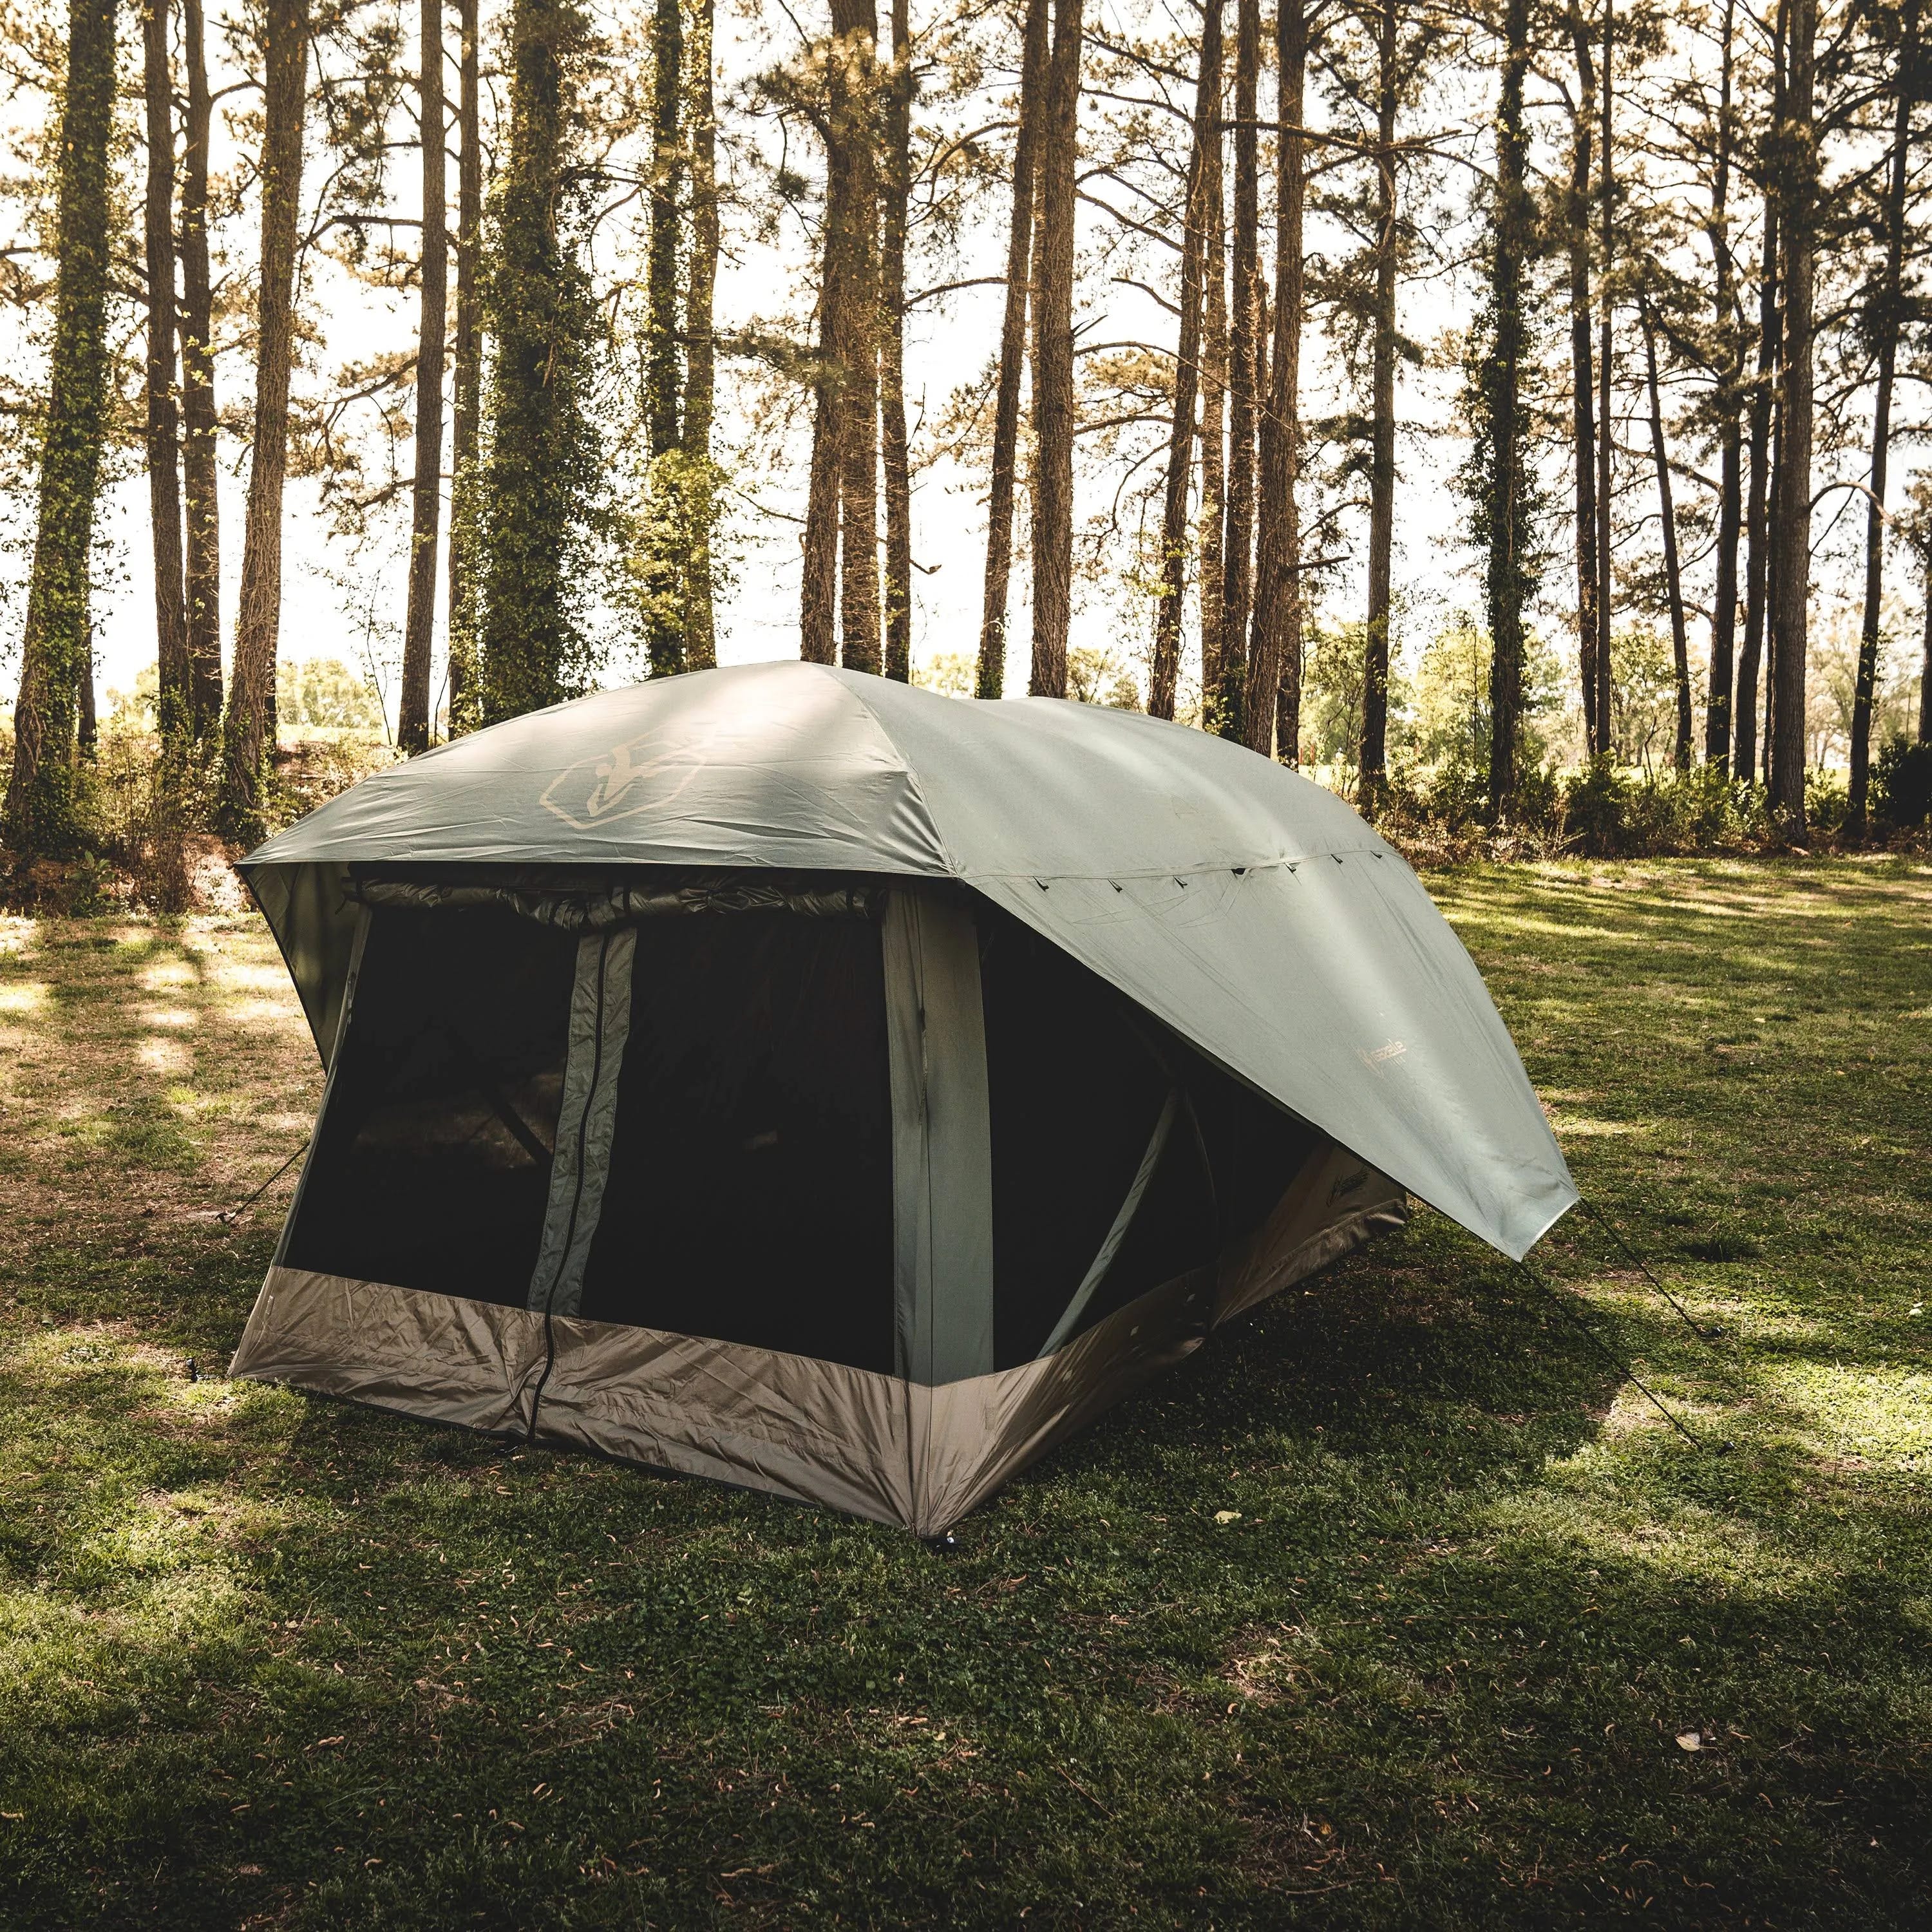 Gazelle T4 Plus Hub Tent Overland Edition: Spacious 3-Season Camping Tent for 4-8 People | Image